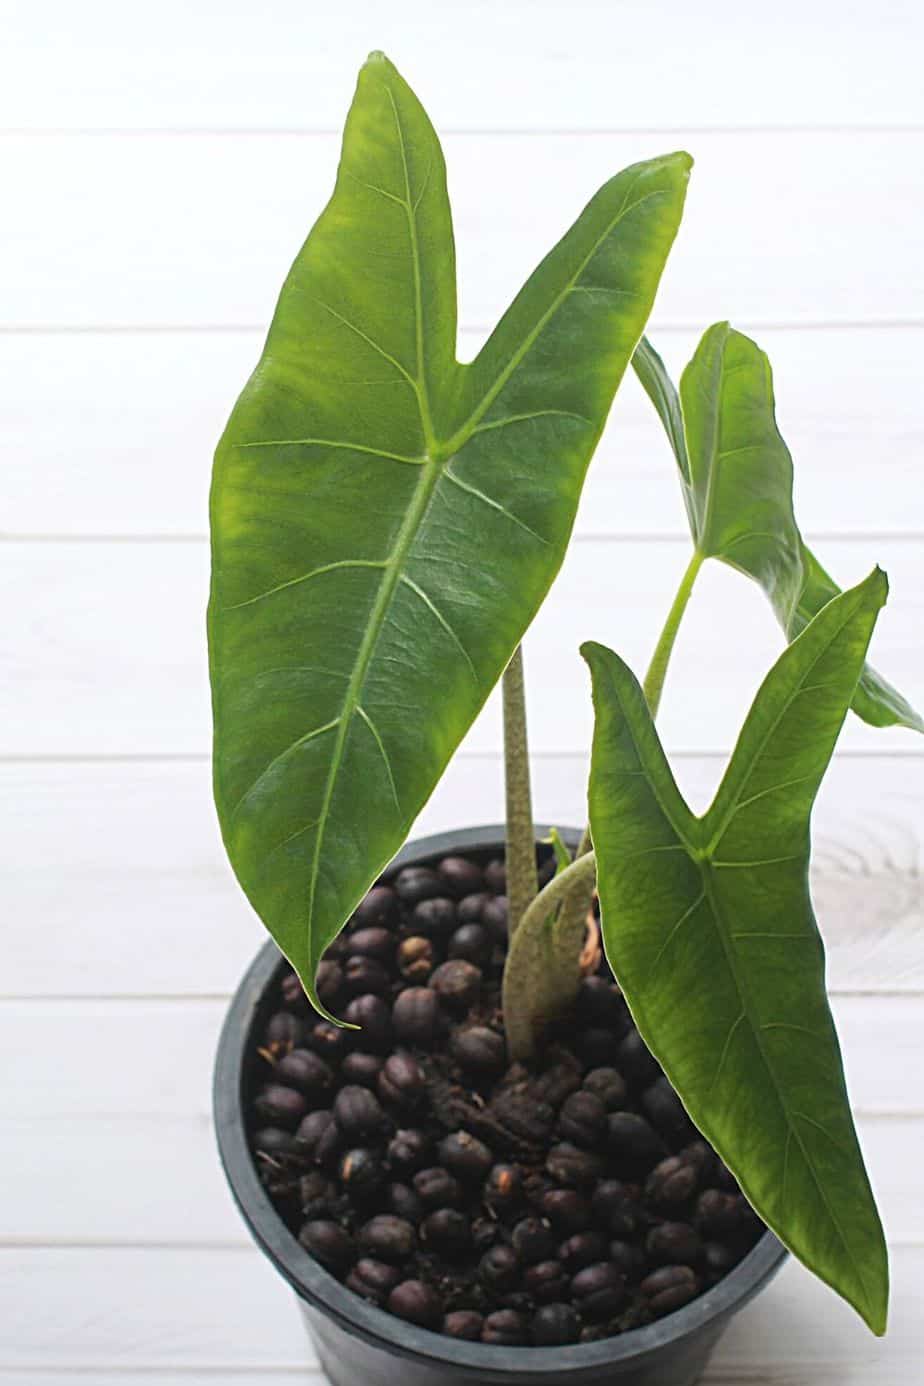 You'll have to keep pruning your Heartleaf Philodendron to avoid it overrunning your northwest-facing window